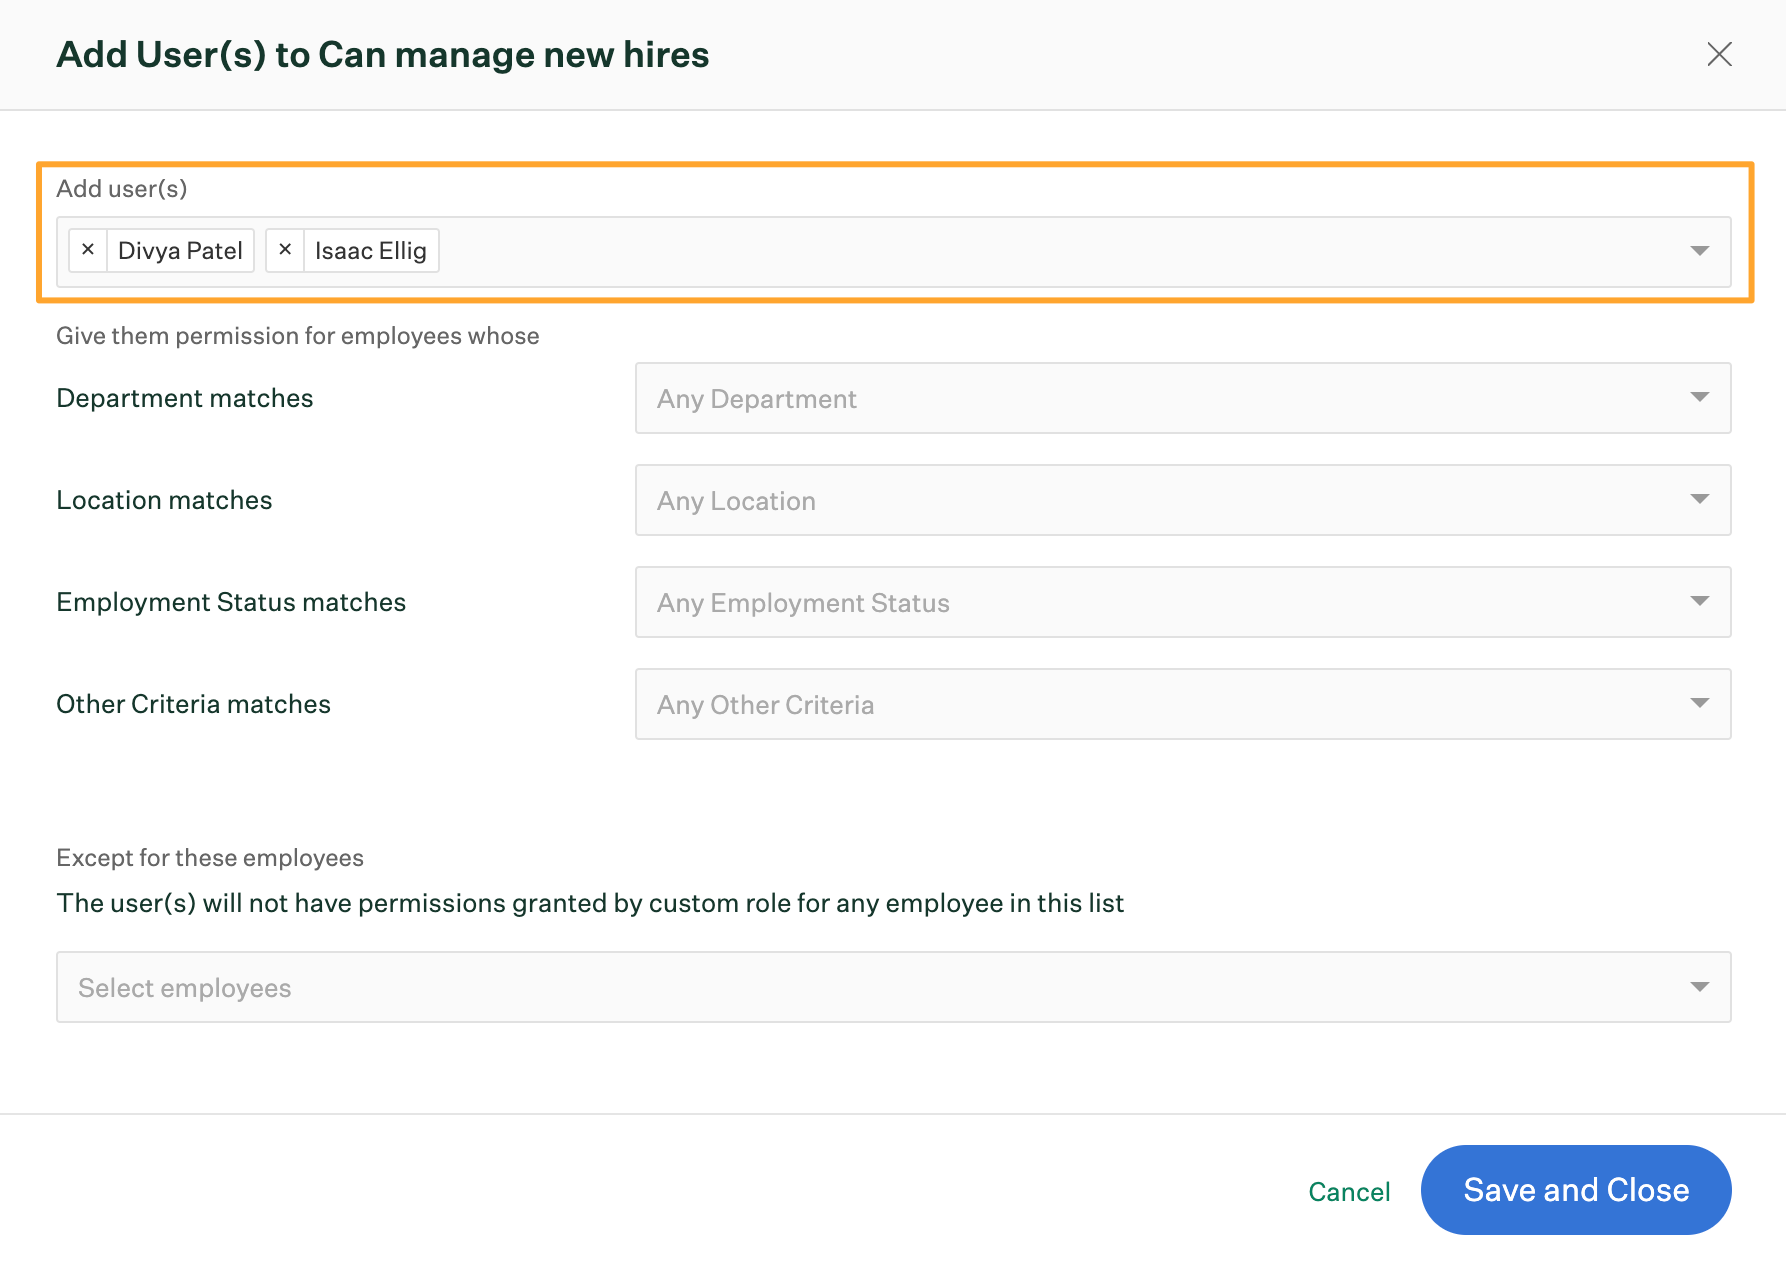 Adding two users to new custom role for managing new hires with Add users field highlighted